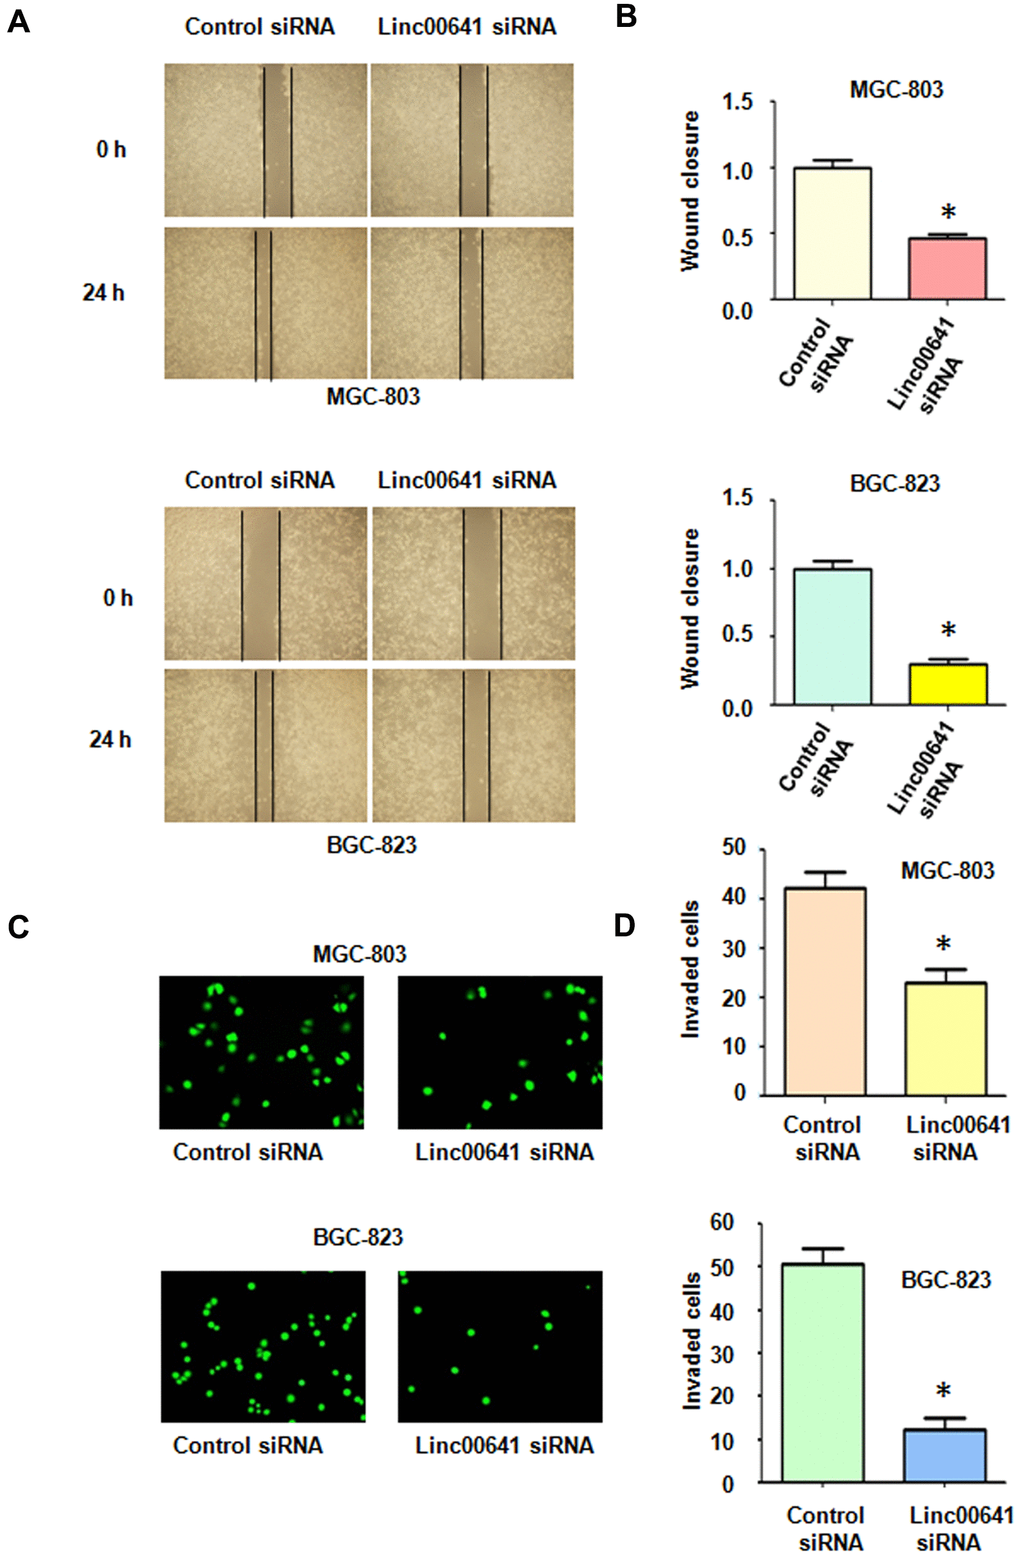 Effects of linc00641 silencing on migration and invasion. (A) Wound healing assays were carried out to test the effects of linc00641 silencing in gastric cancer cells. (B) Quantification of the migratory results.*P C) Invasive ability was measured by Transwell invasion assays. (D) Quantification of the invasiveness results.*P 